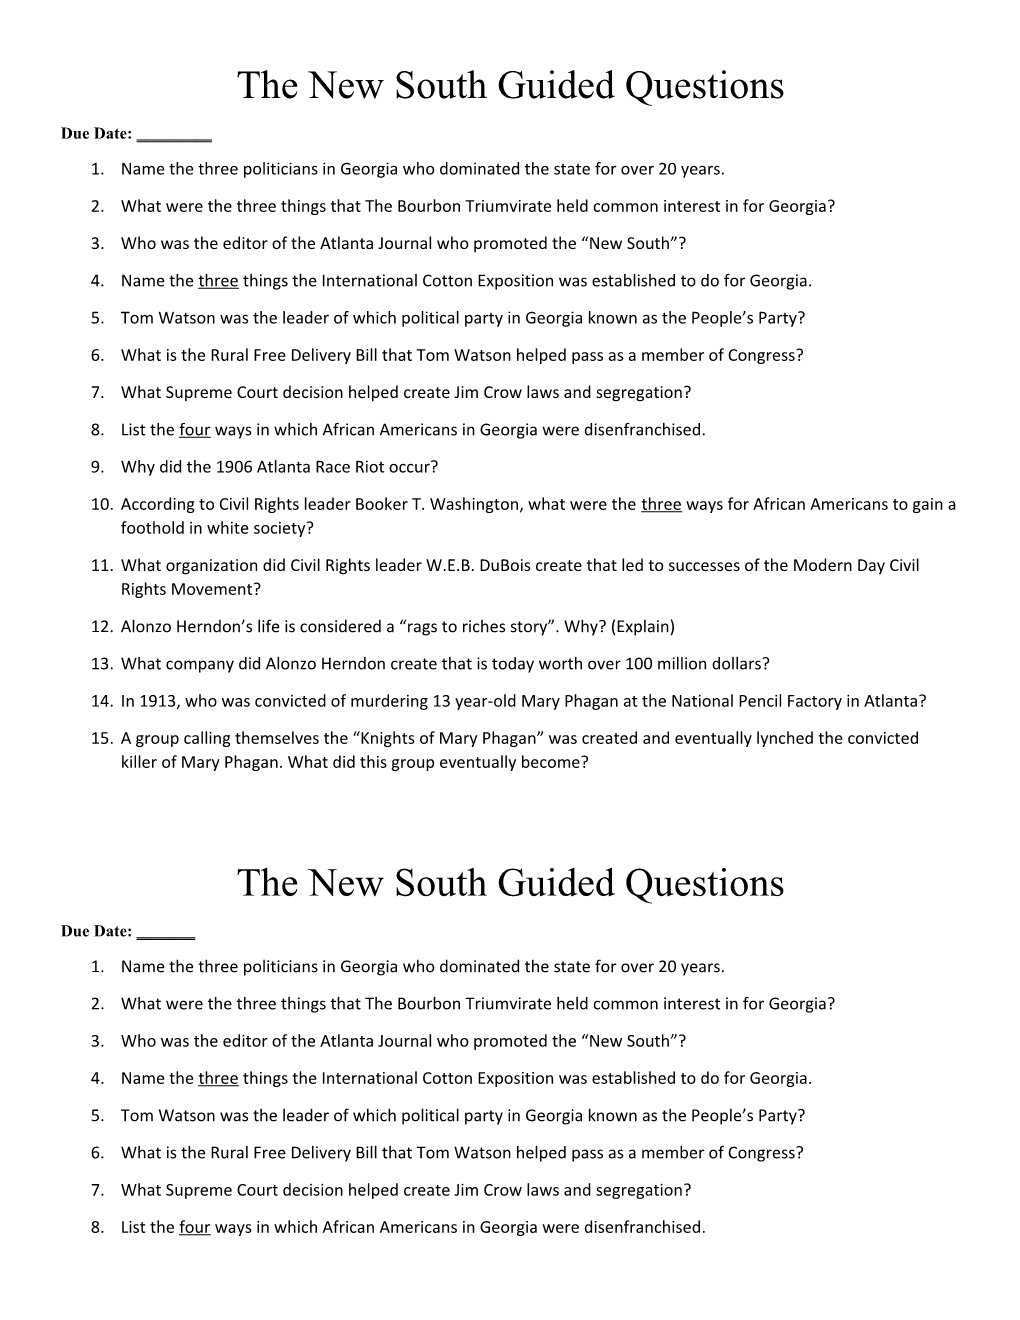 The New South Guided Questions